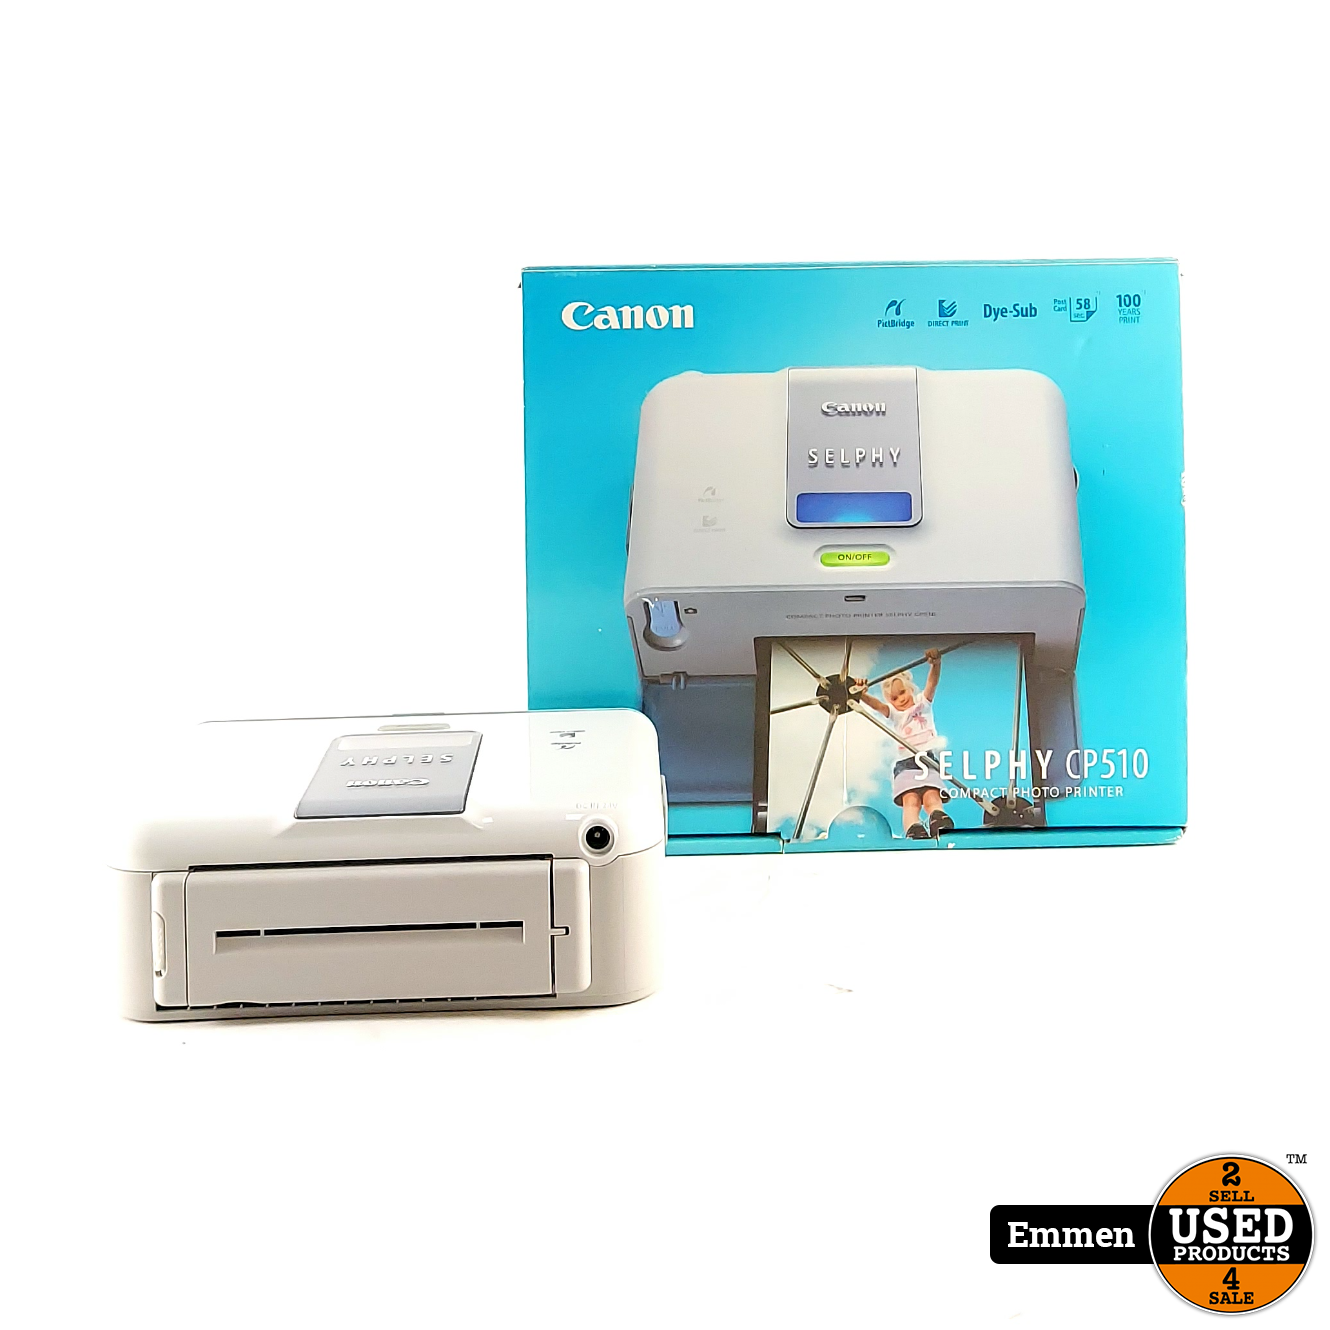 Welkom Dochter Republikeinse partij Canon Selphy CP510 Compact Foto Printer | In Nette Staat - Used Products  Emmen